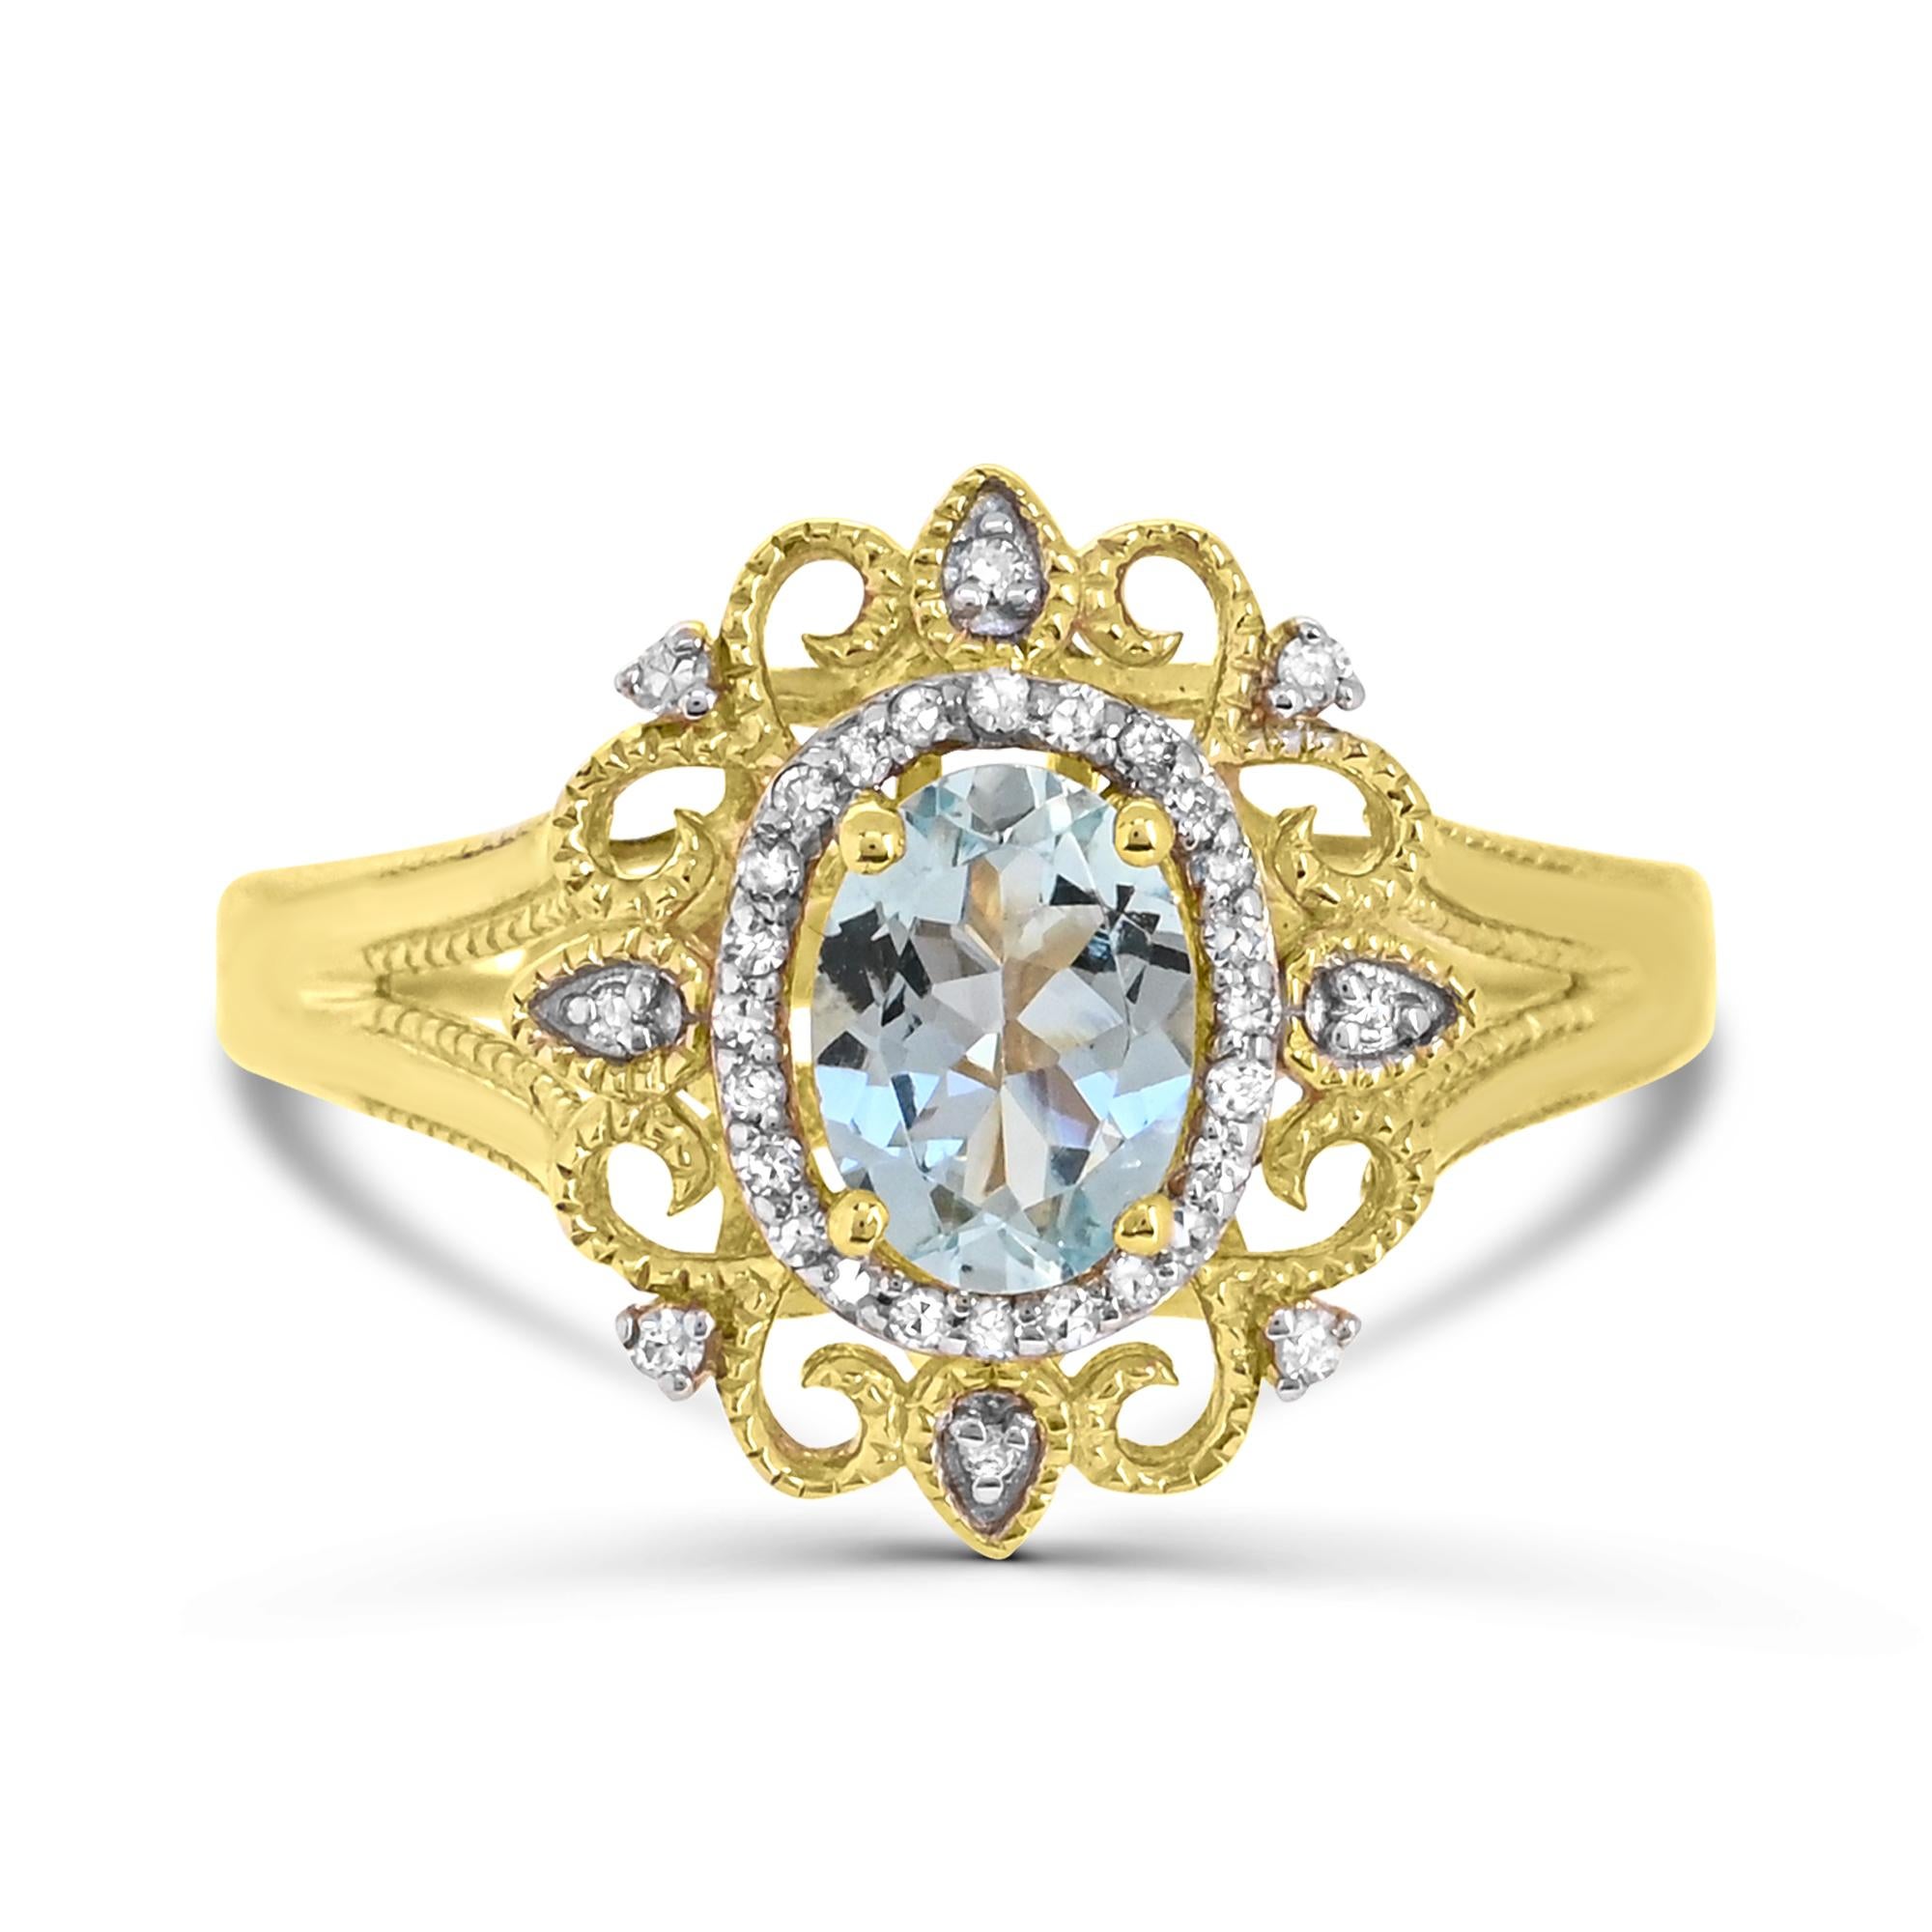 Indulge in the elegance of our Aquamarine and White Diamond Accented Ring in 14K Yellow Gold. Crafted with meticulous attention to detail, this ring boasts a stunning combination of oval aquamarine accented by sparkling A-quality round single-cut